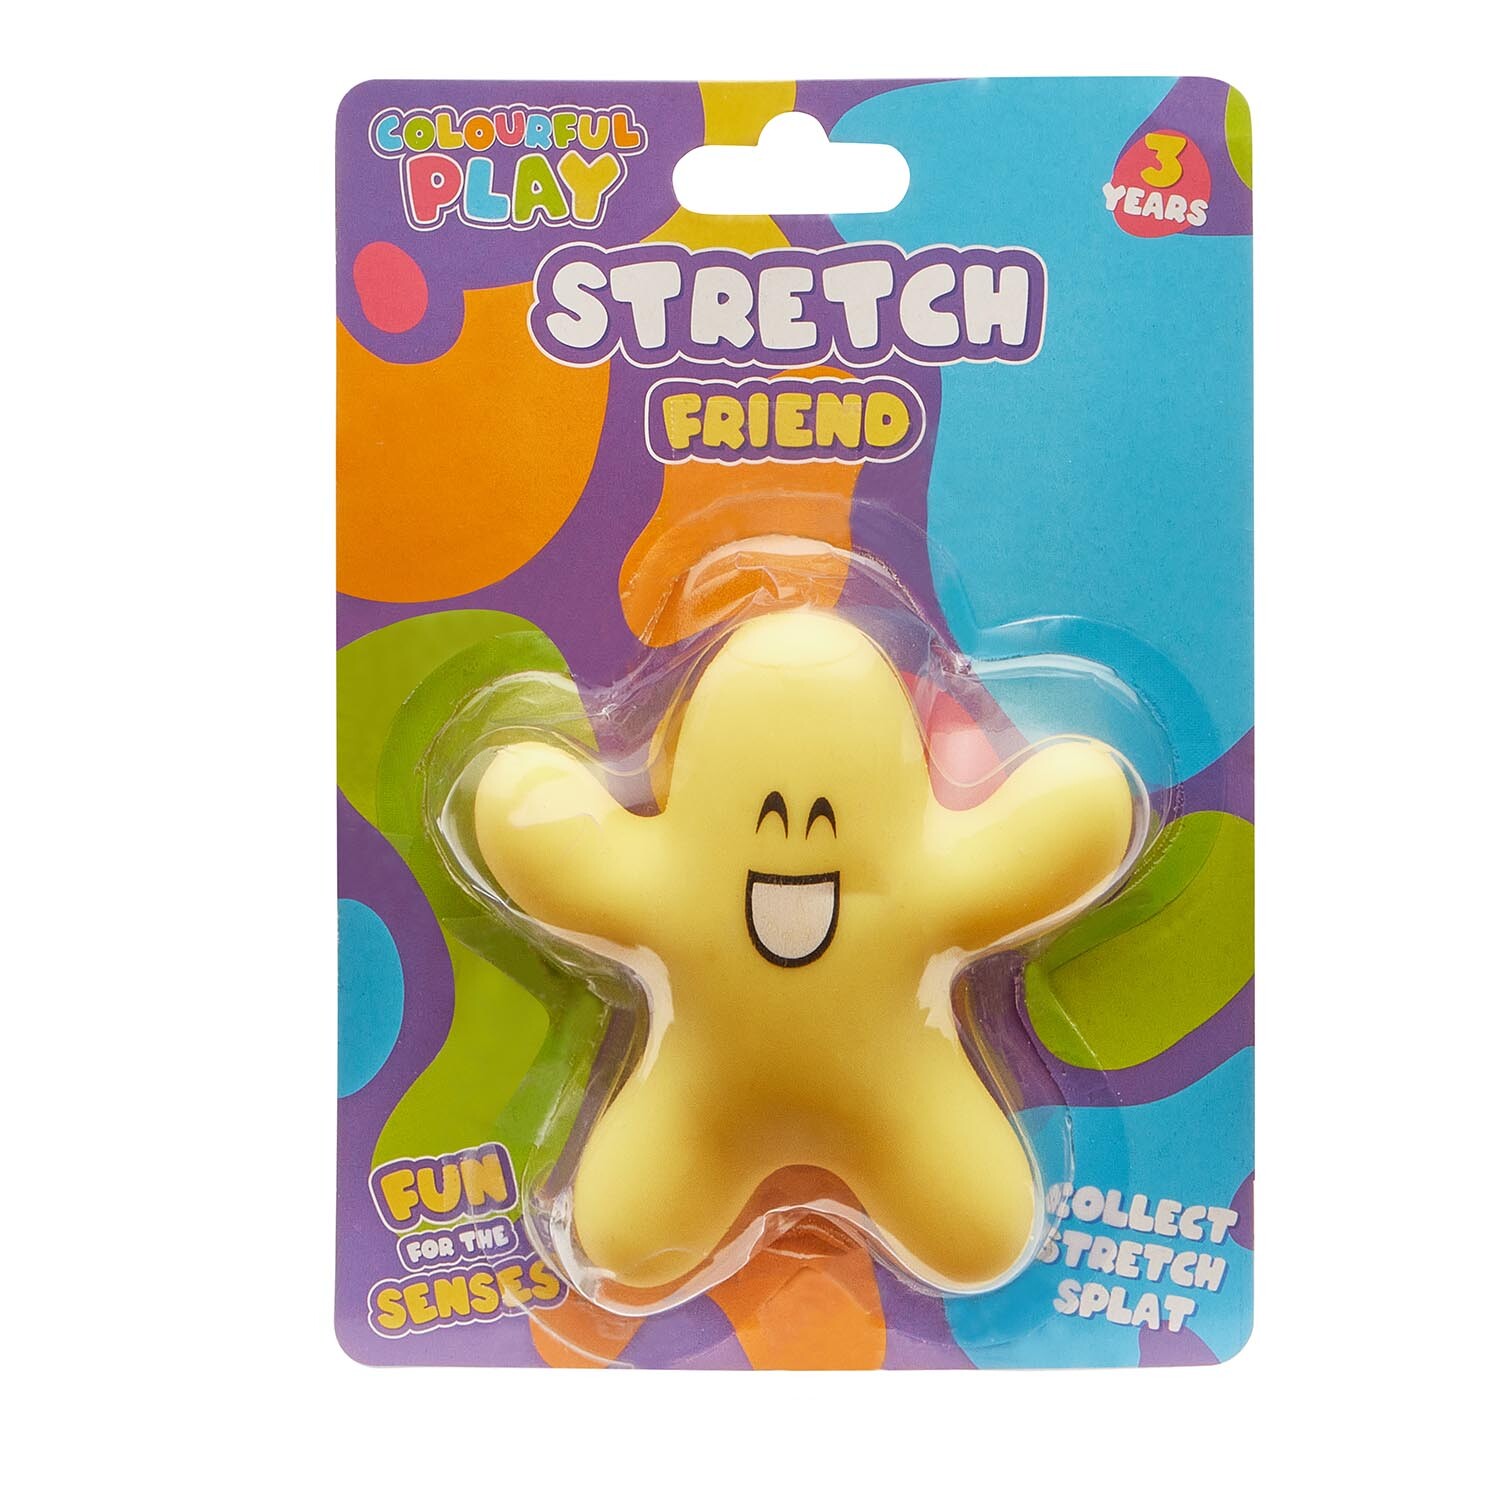 Colourful Play Stretch Friend Image 2